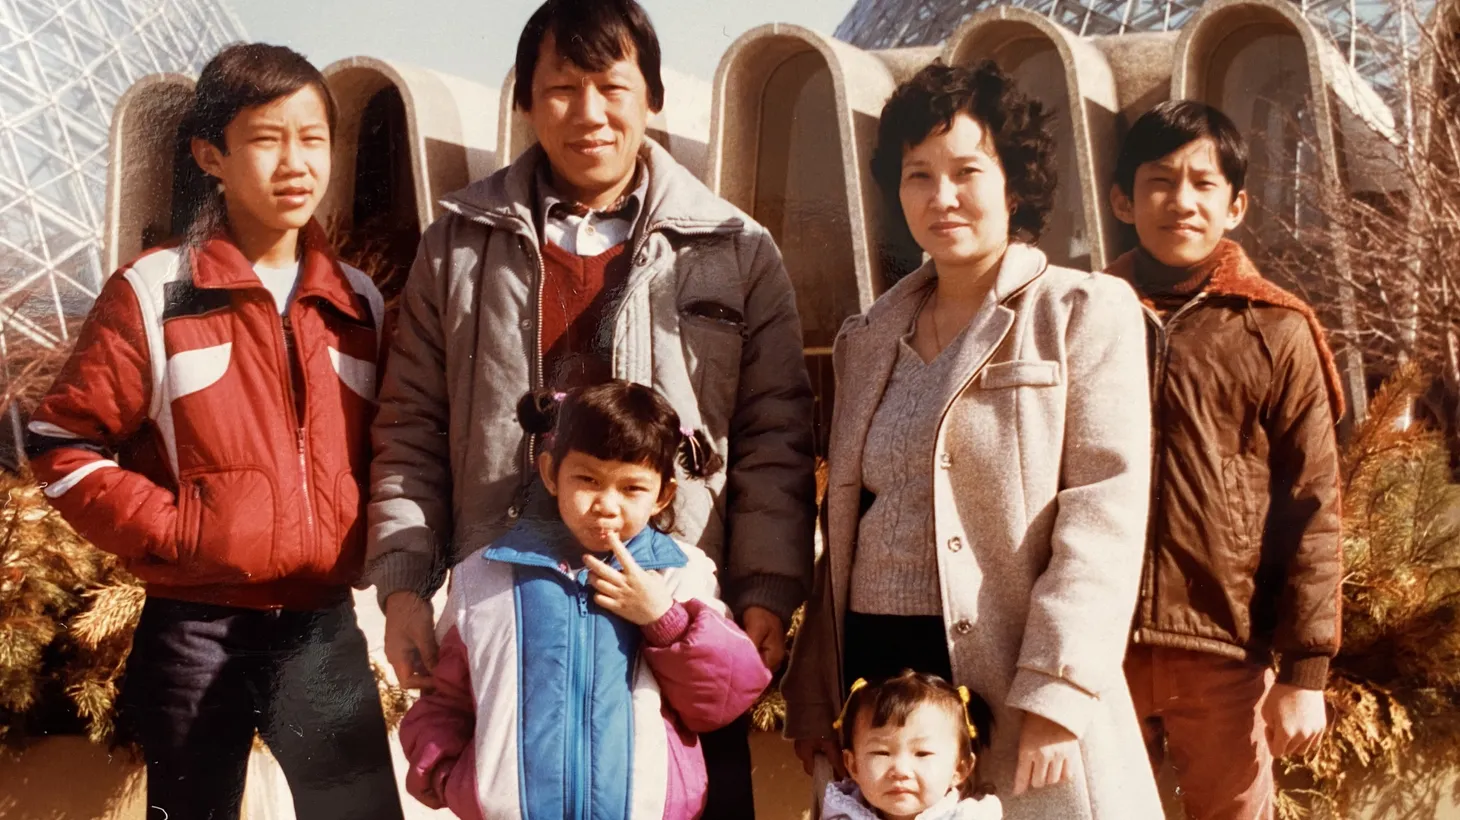 Jean Trinh (pictured here as a baby) says the Chinese cruller was more than a doughnut to her family, it was a symbol of resilience as they immigrated to America.